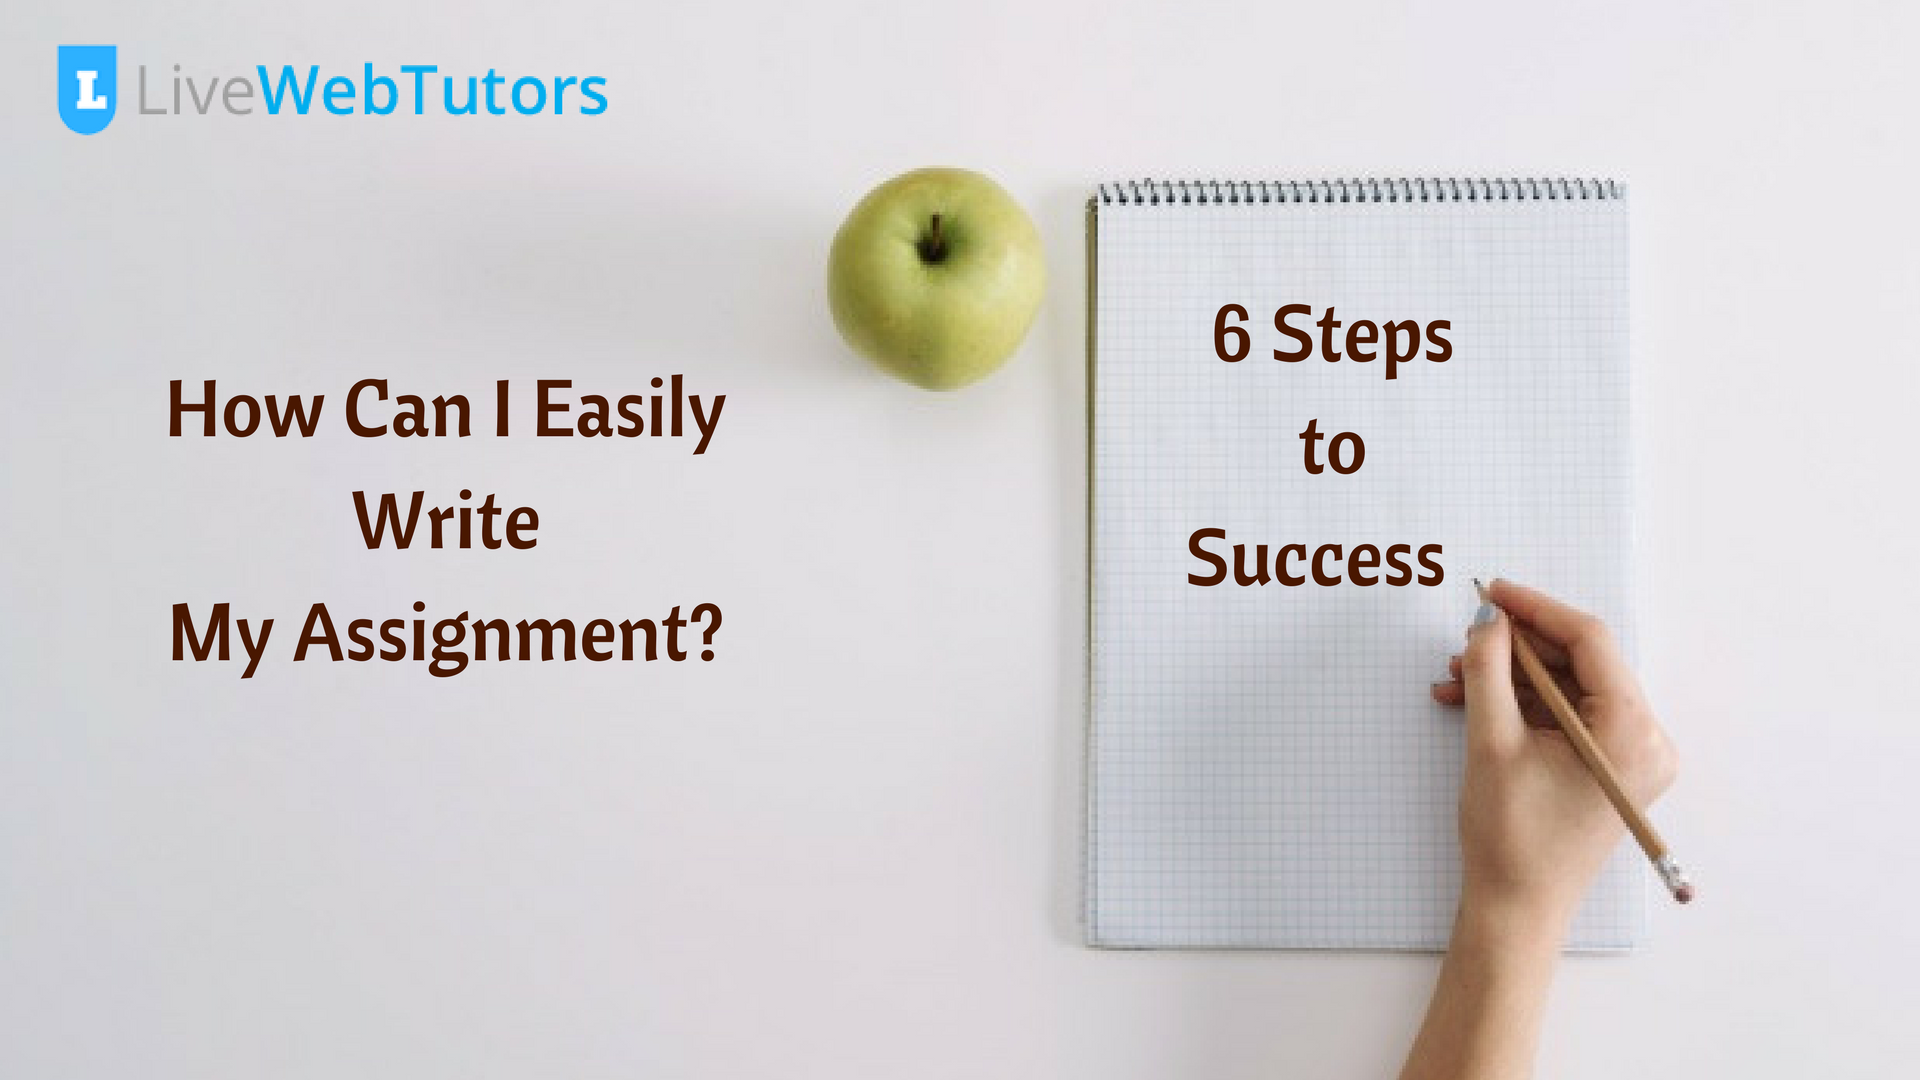 How Can I Easily Write My Assignment? 6 Steps to Success